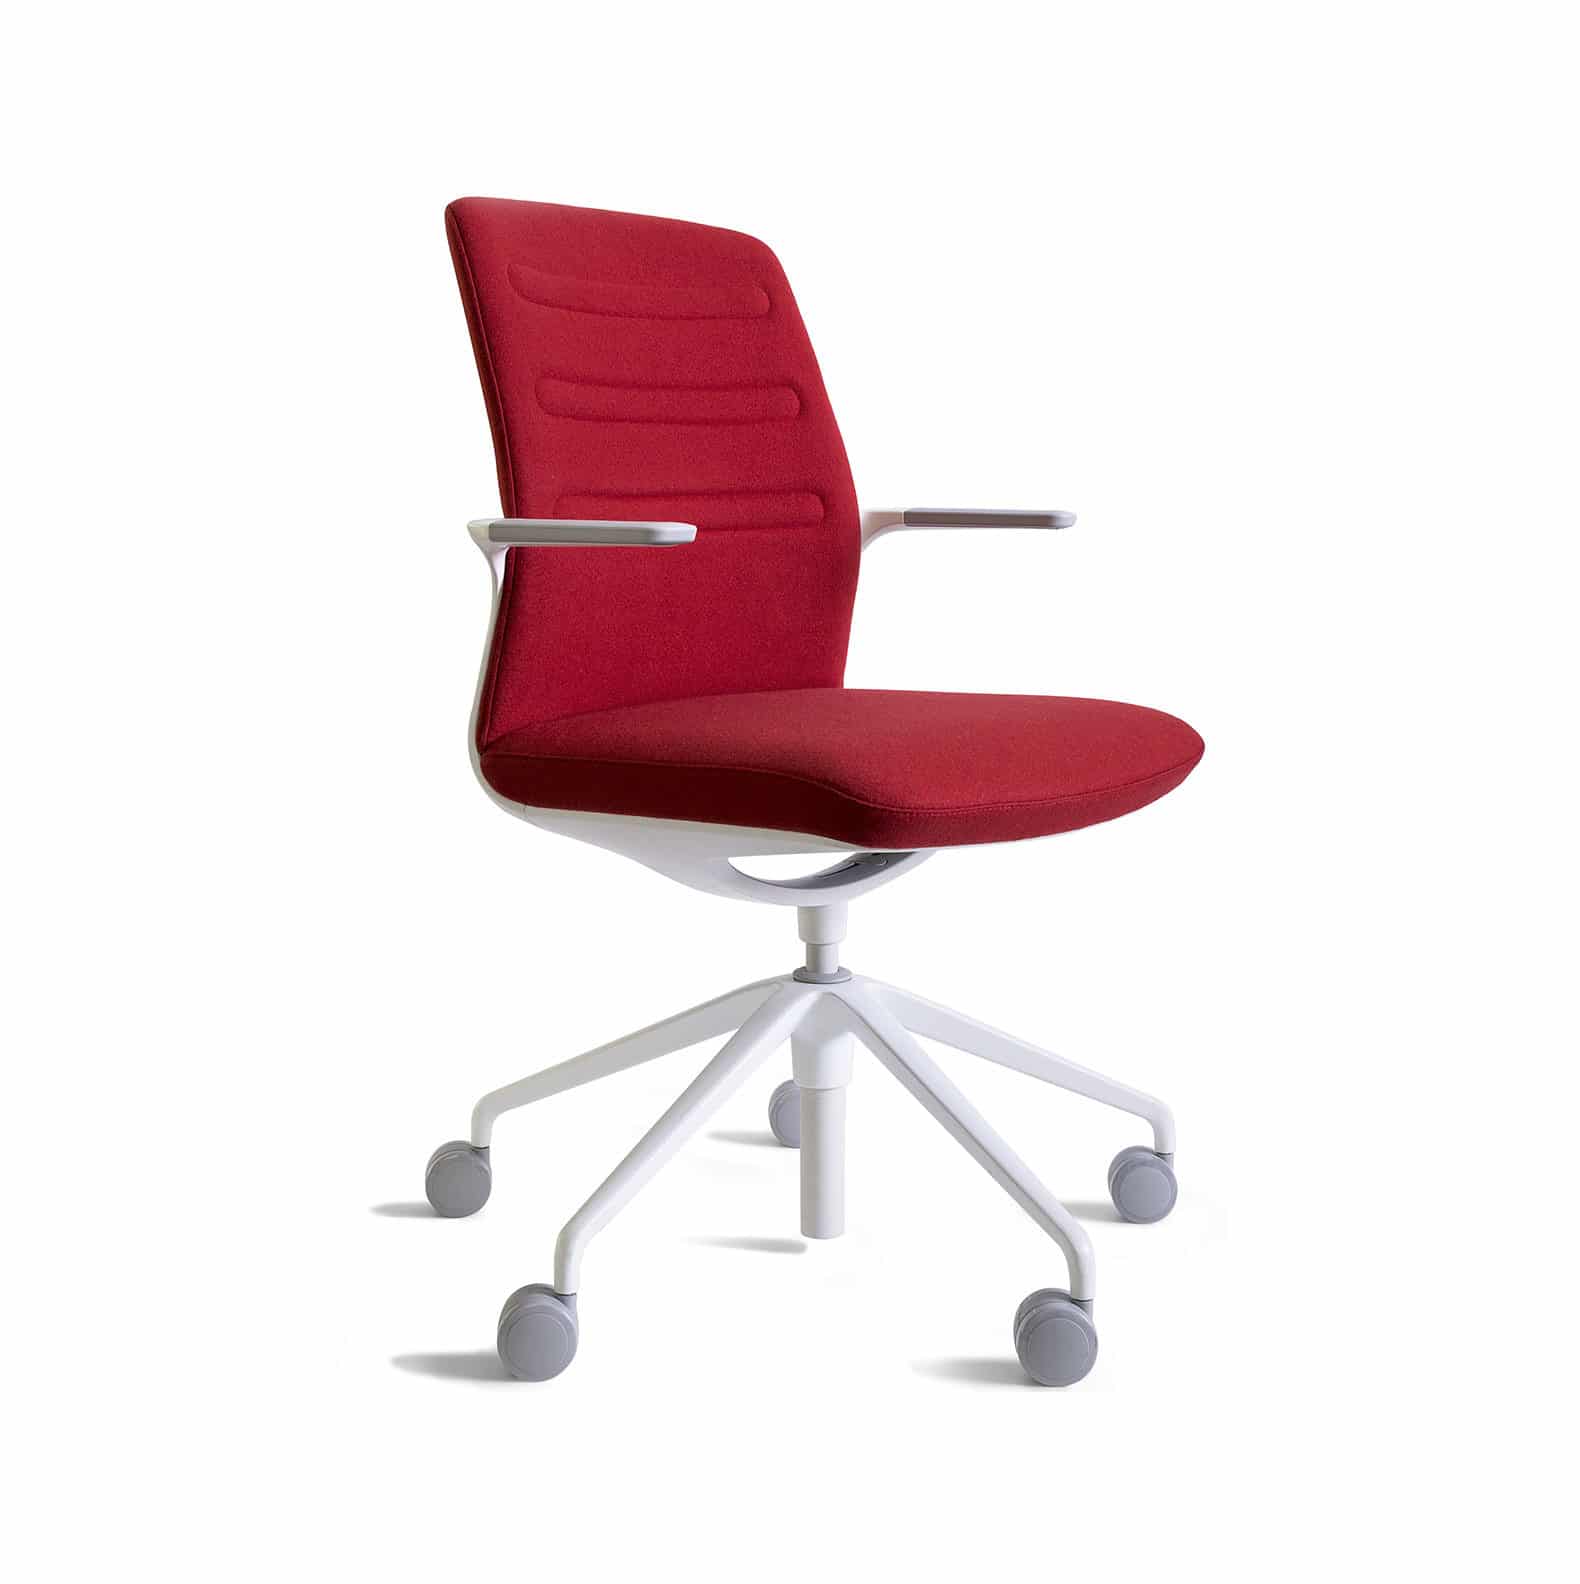 Stylex FX-4 Mid-Back Chair in Fabric Upholestry